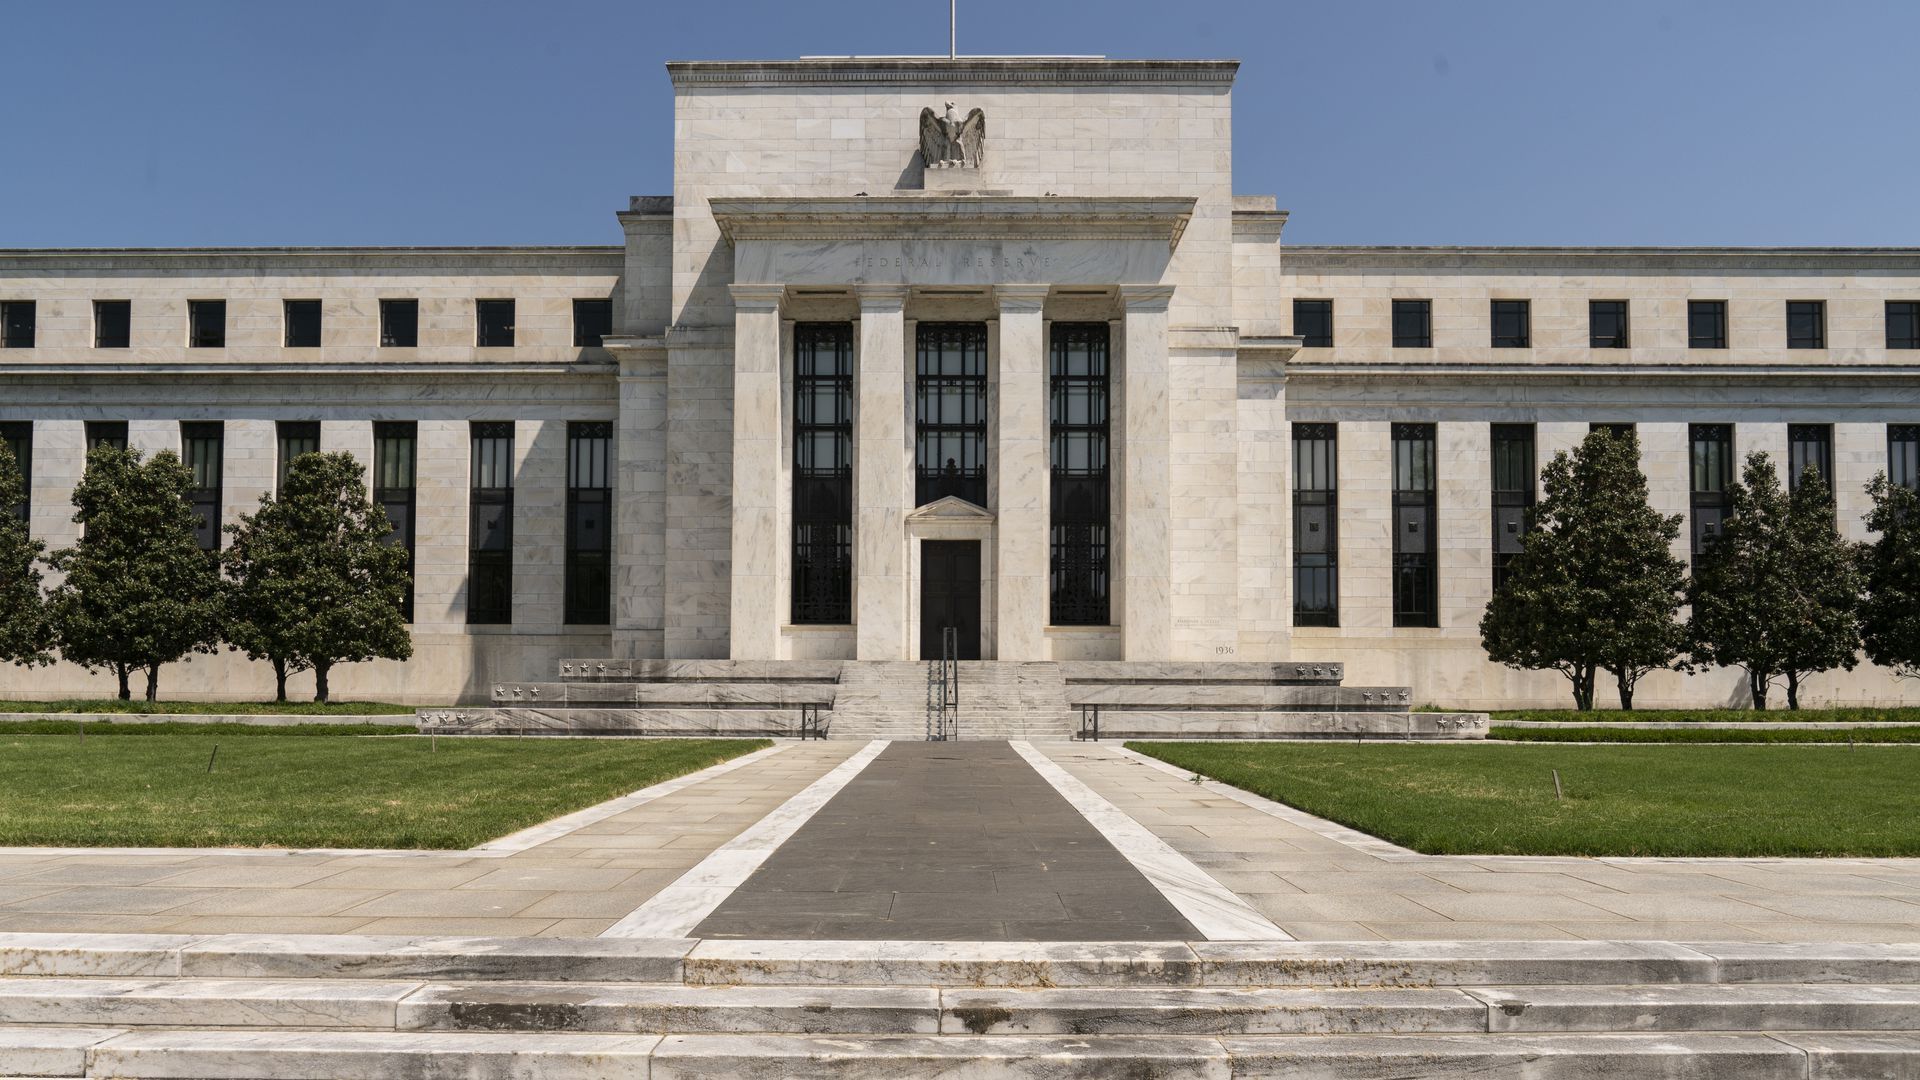 The Fed's building in Washington. Photo: Joshua Roberts/Bloomberg via Getty Images